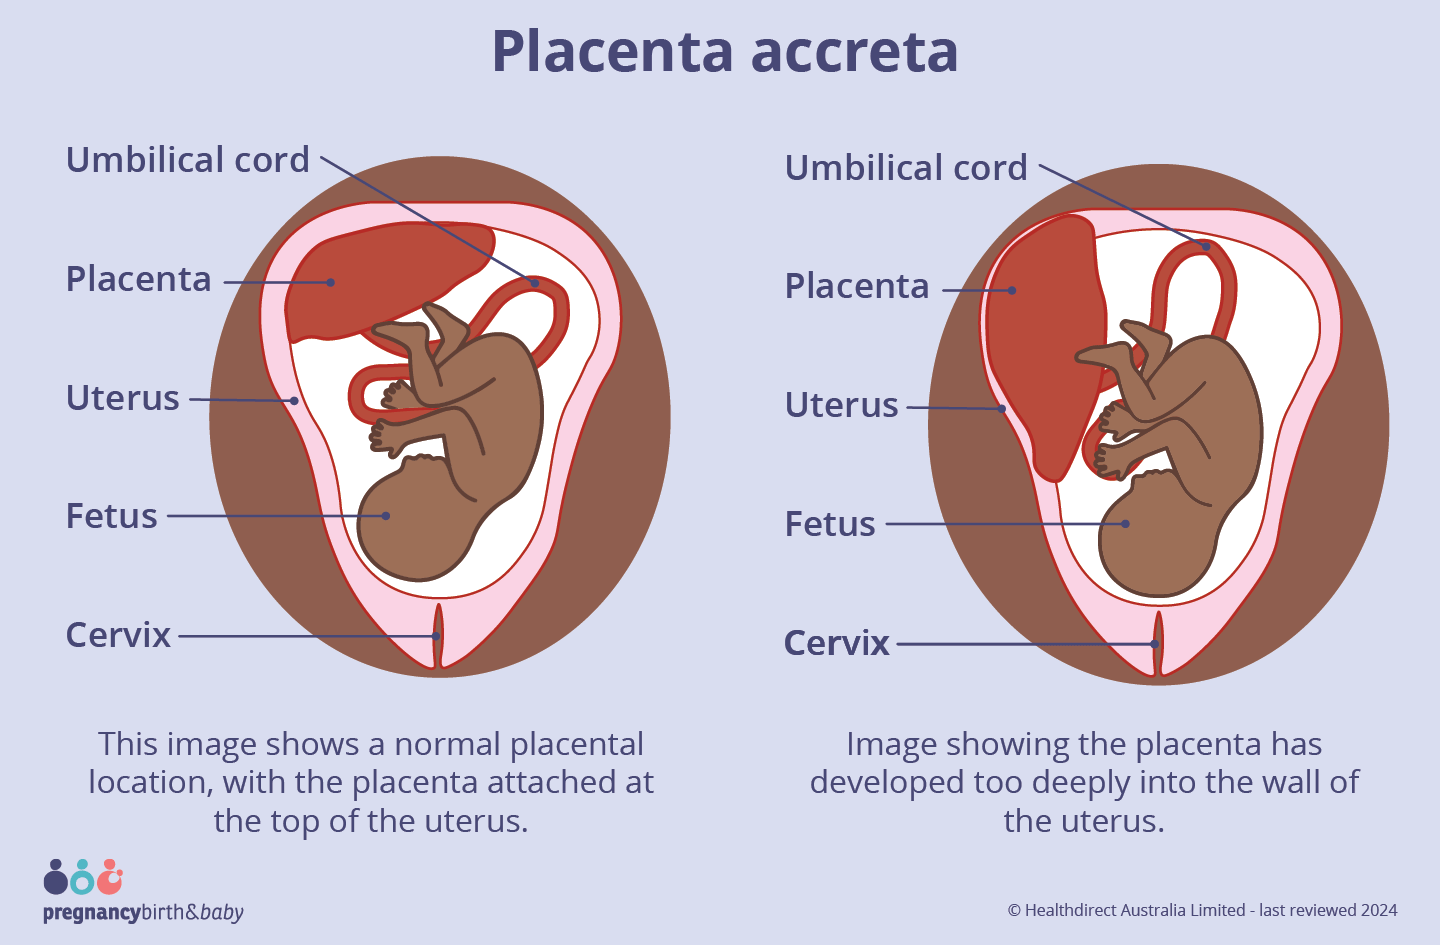 Image showing the placenta has developed too deeply into the wall of the uterus.